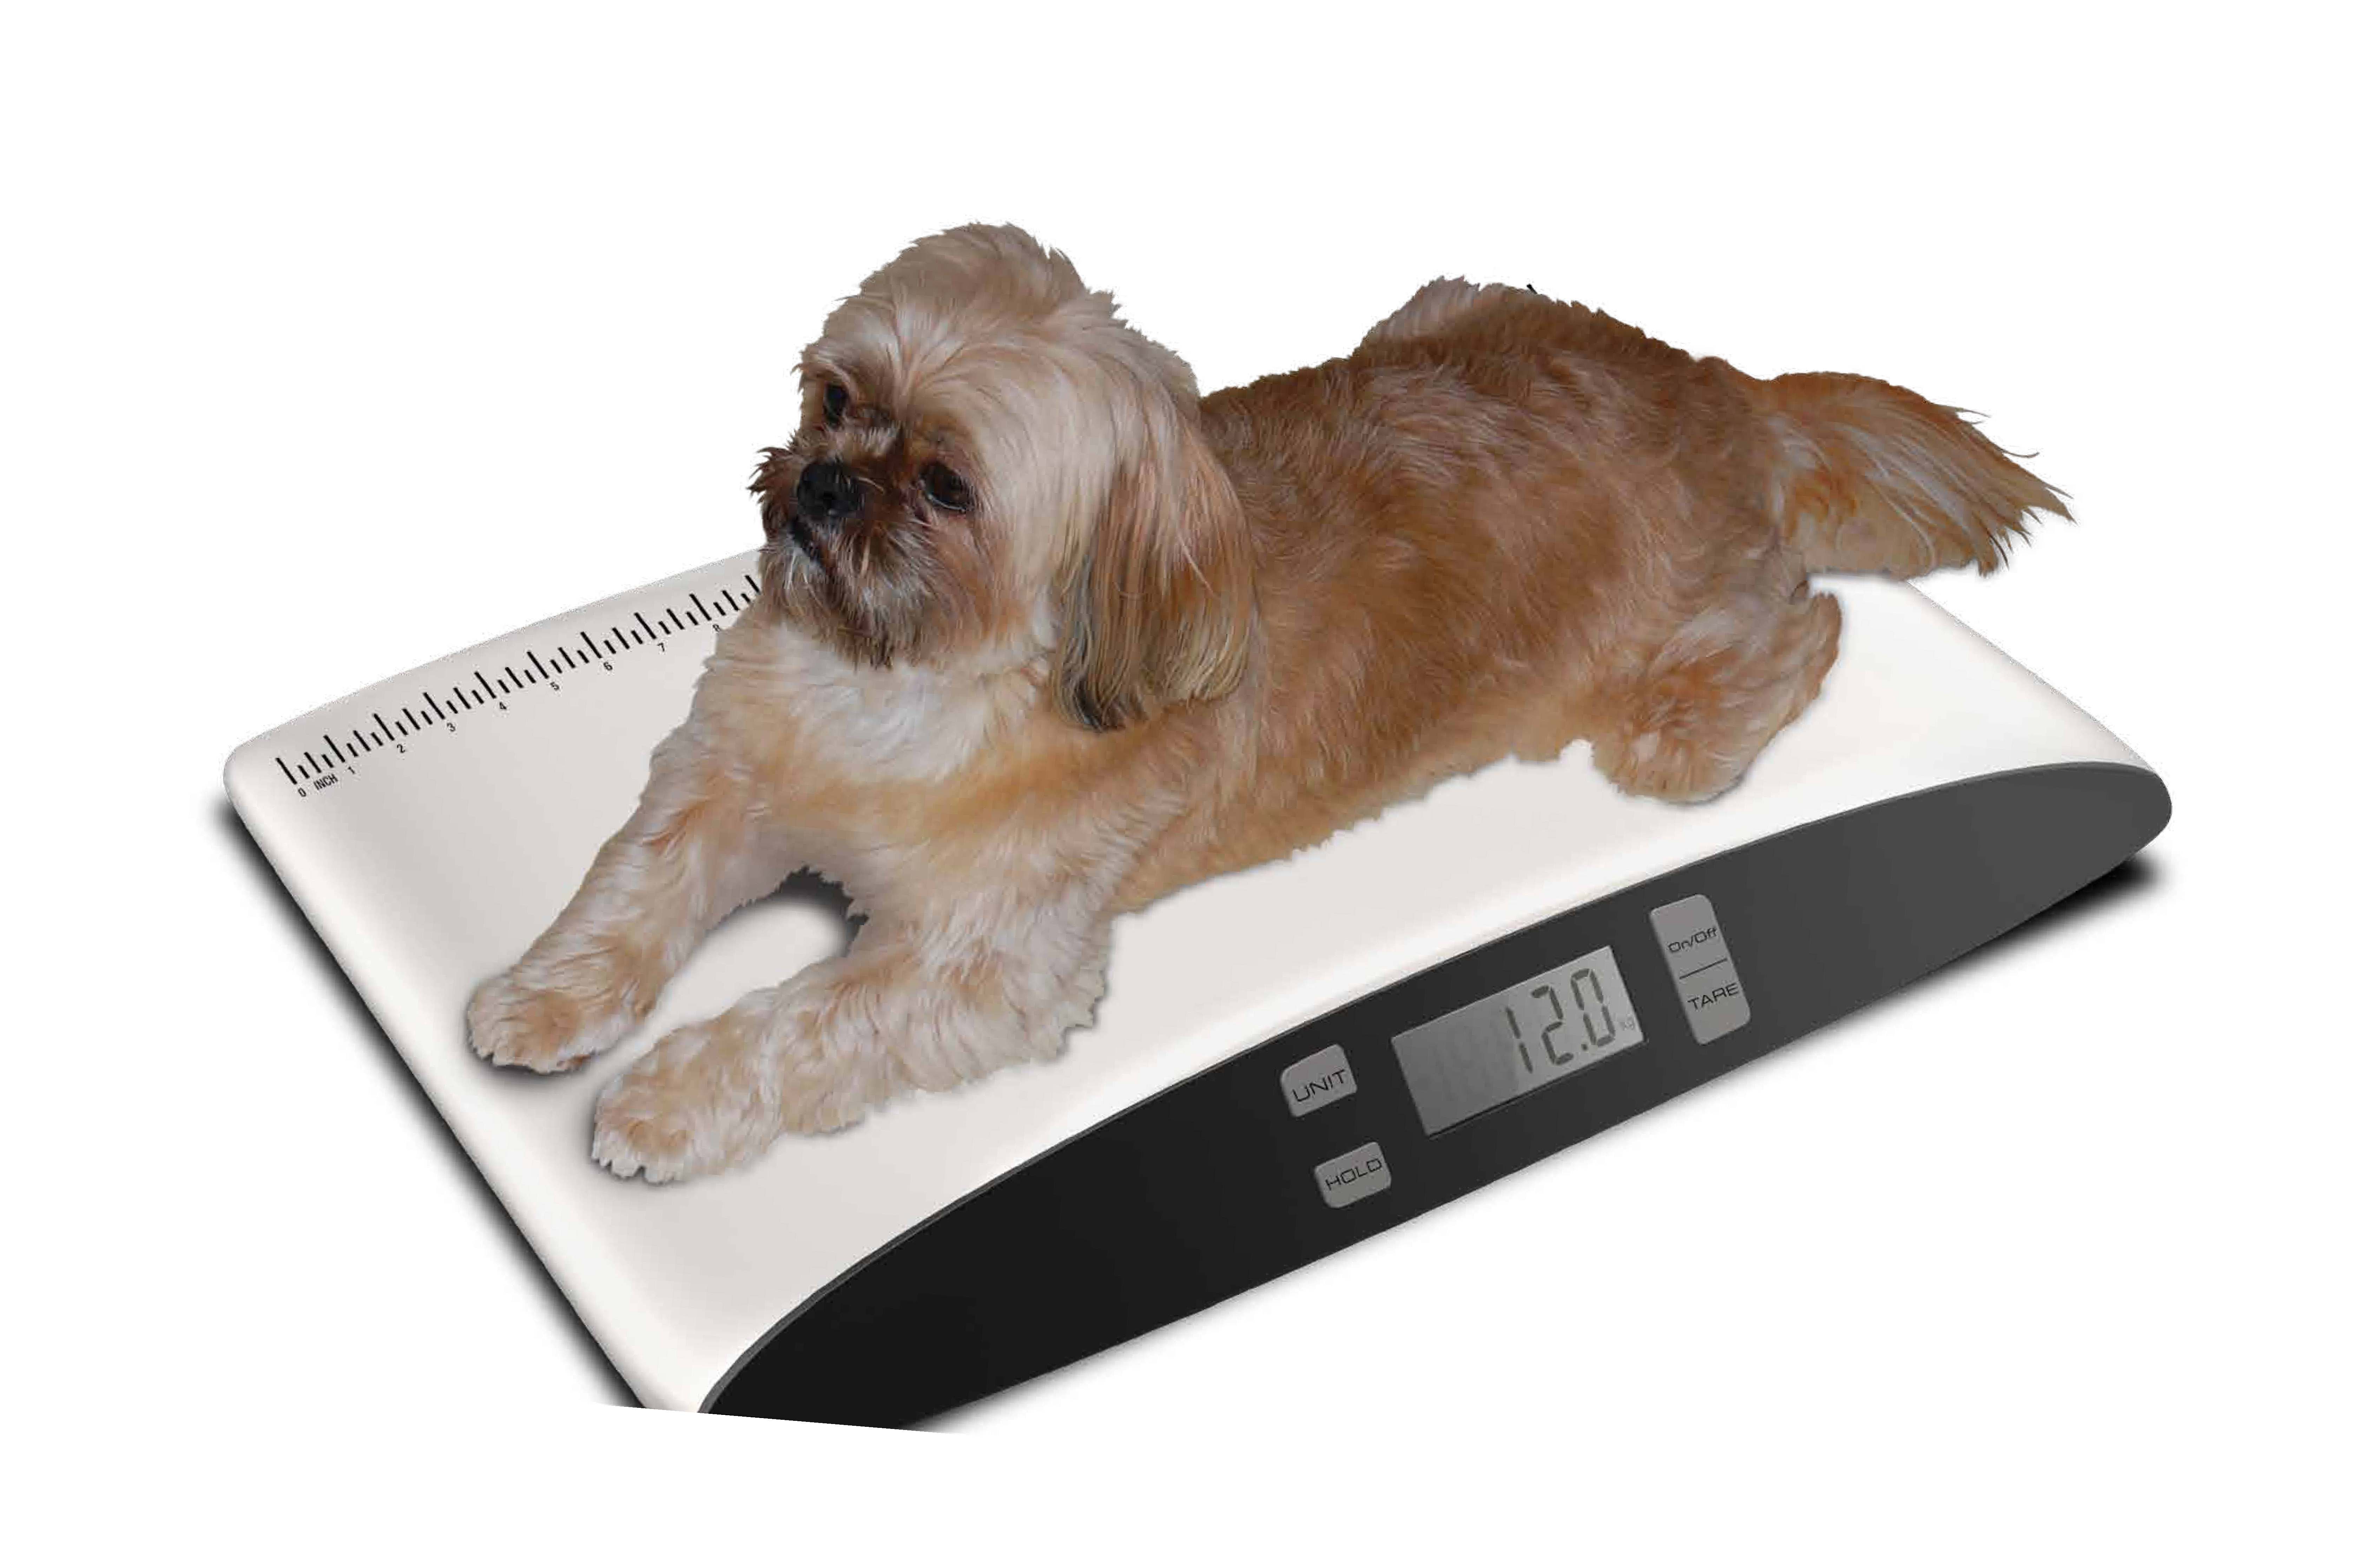 1PC infant scale digital scale for body weight Kitten Scale Small Pet Scale